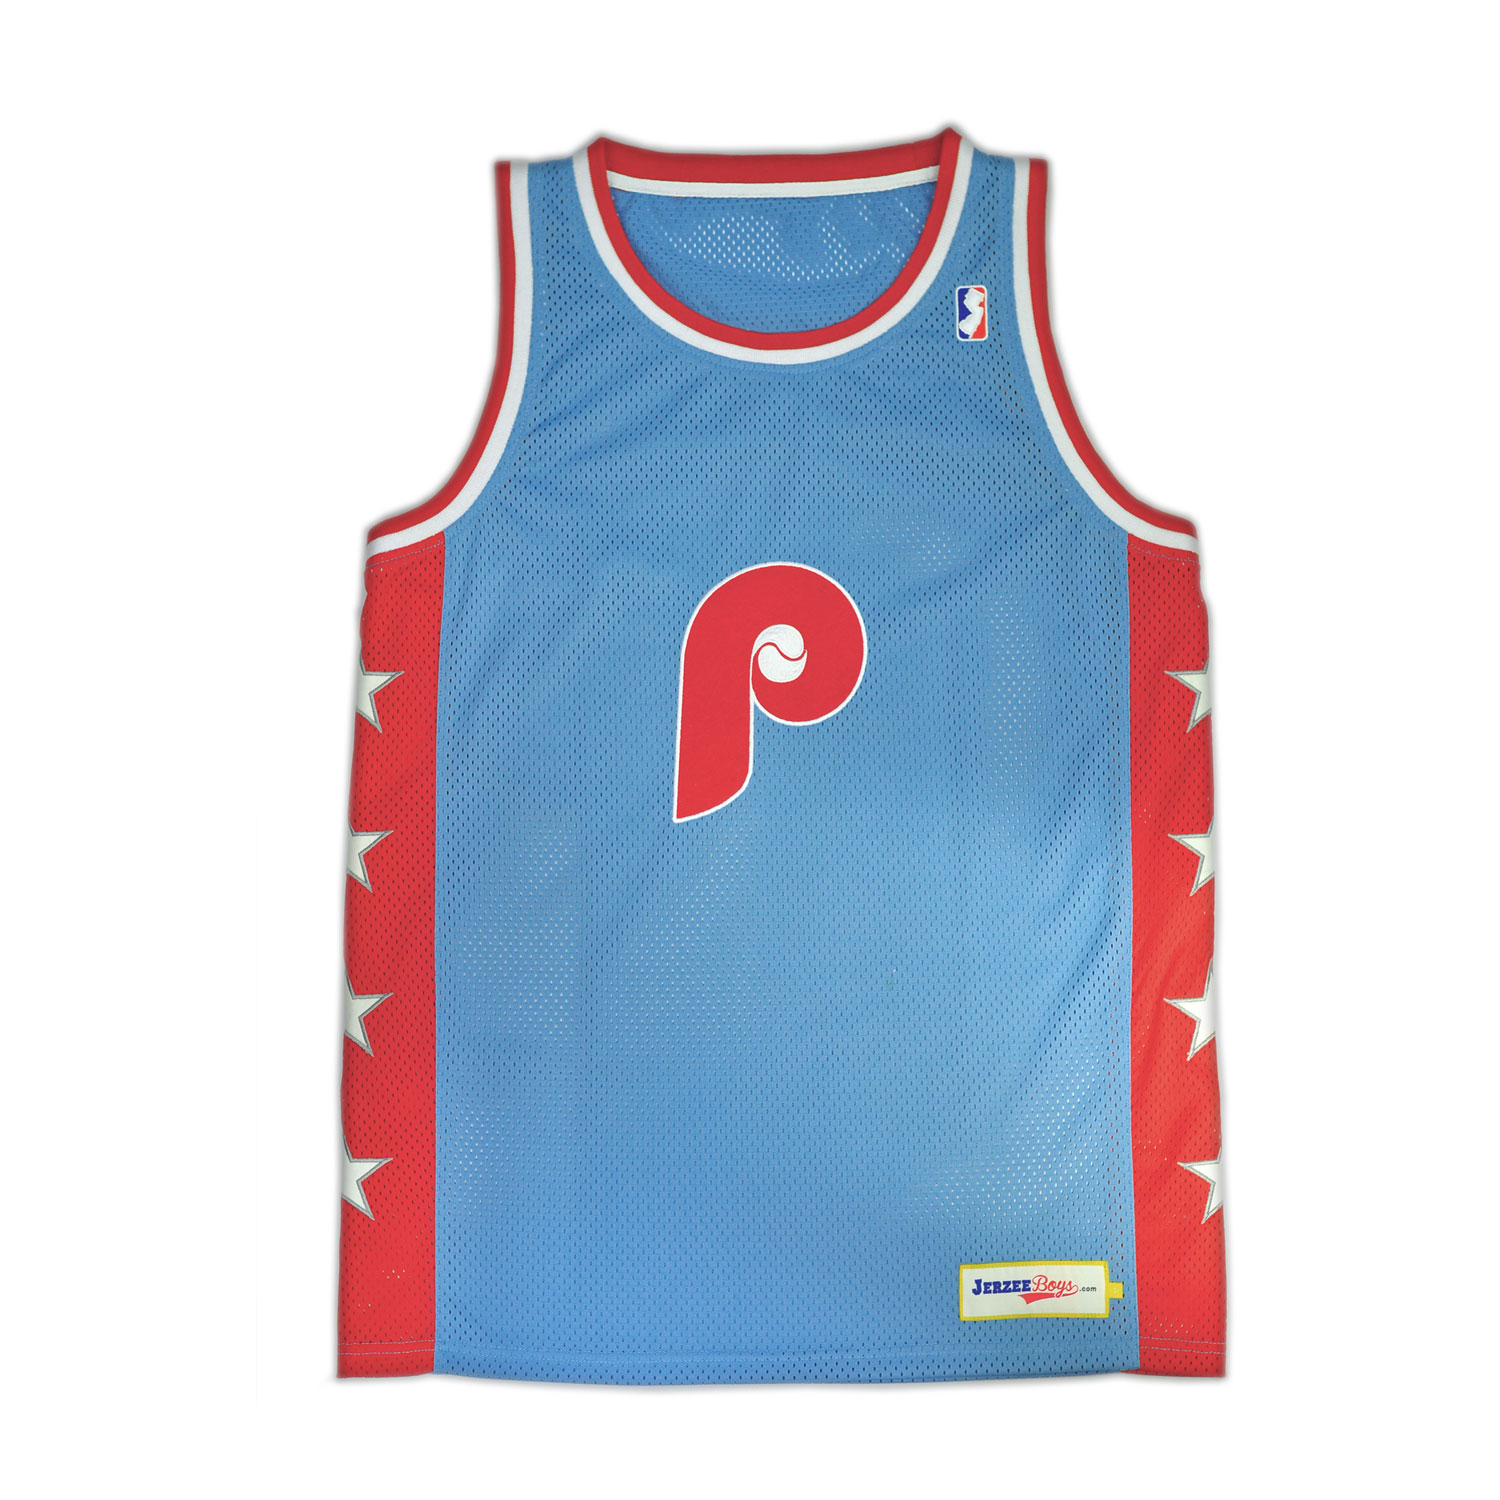 phillies jersey throwback